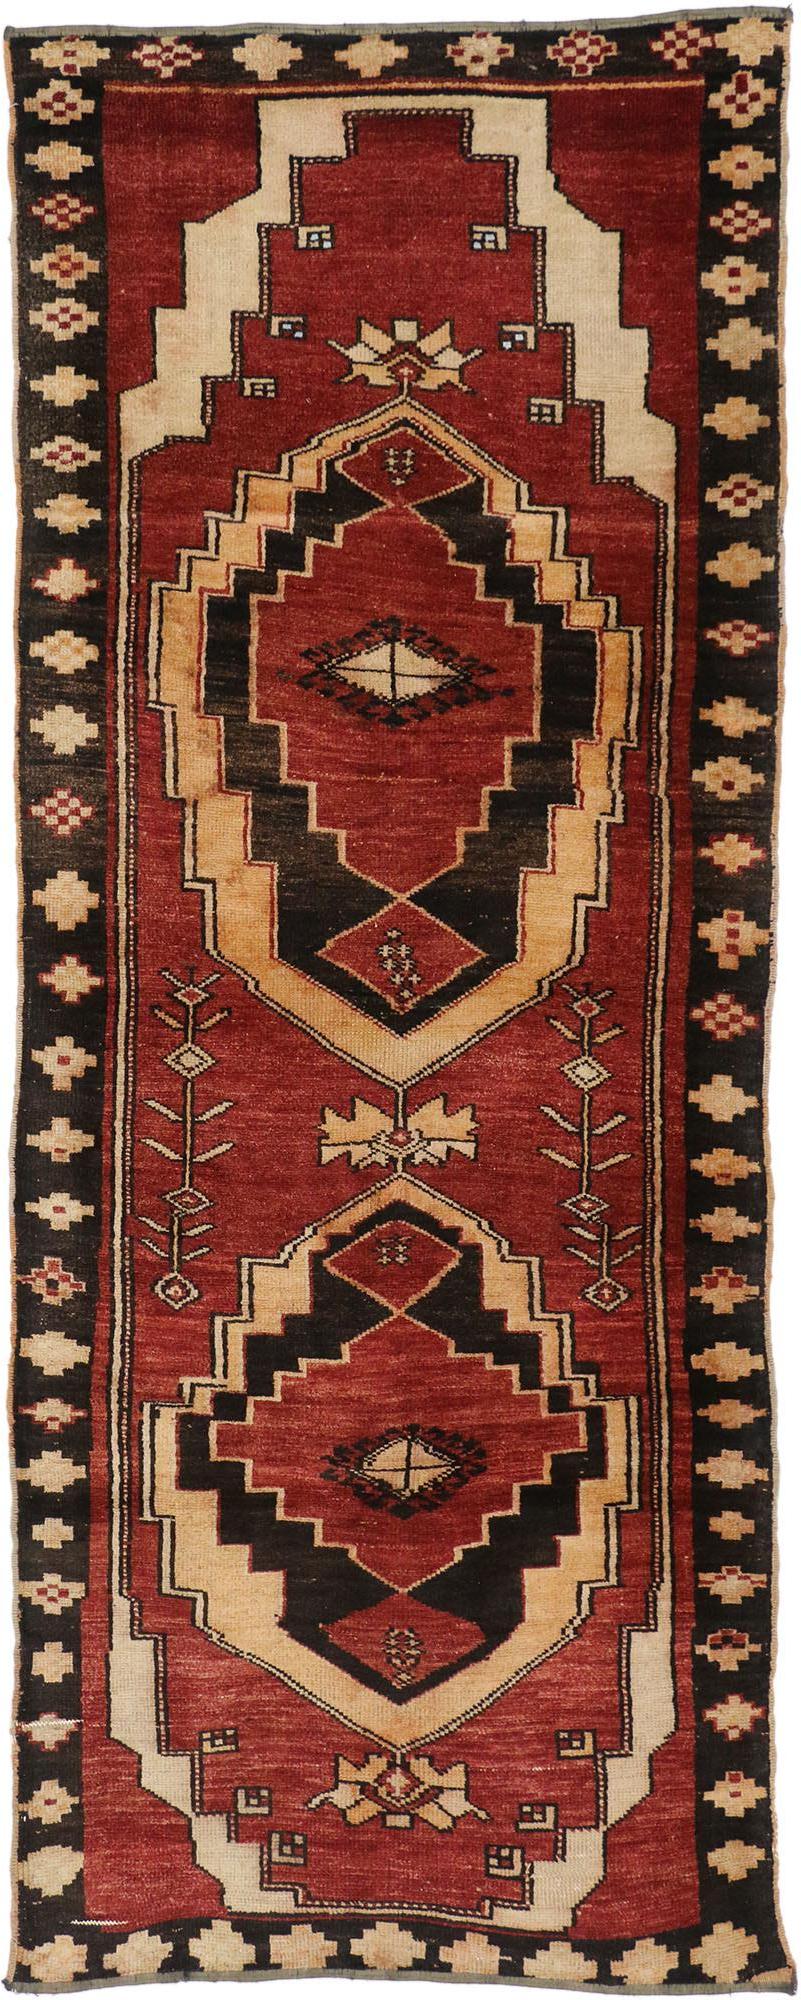 51674 Vintage Turkish Oushak Runner with Mid-Century Modern Style 03'05 x 08'08. This hand-knotted wool vintage Turkish Oushak runner features a geometric pattern with two large stair-step medallions in an abrashed dark red field flanked with